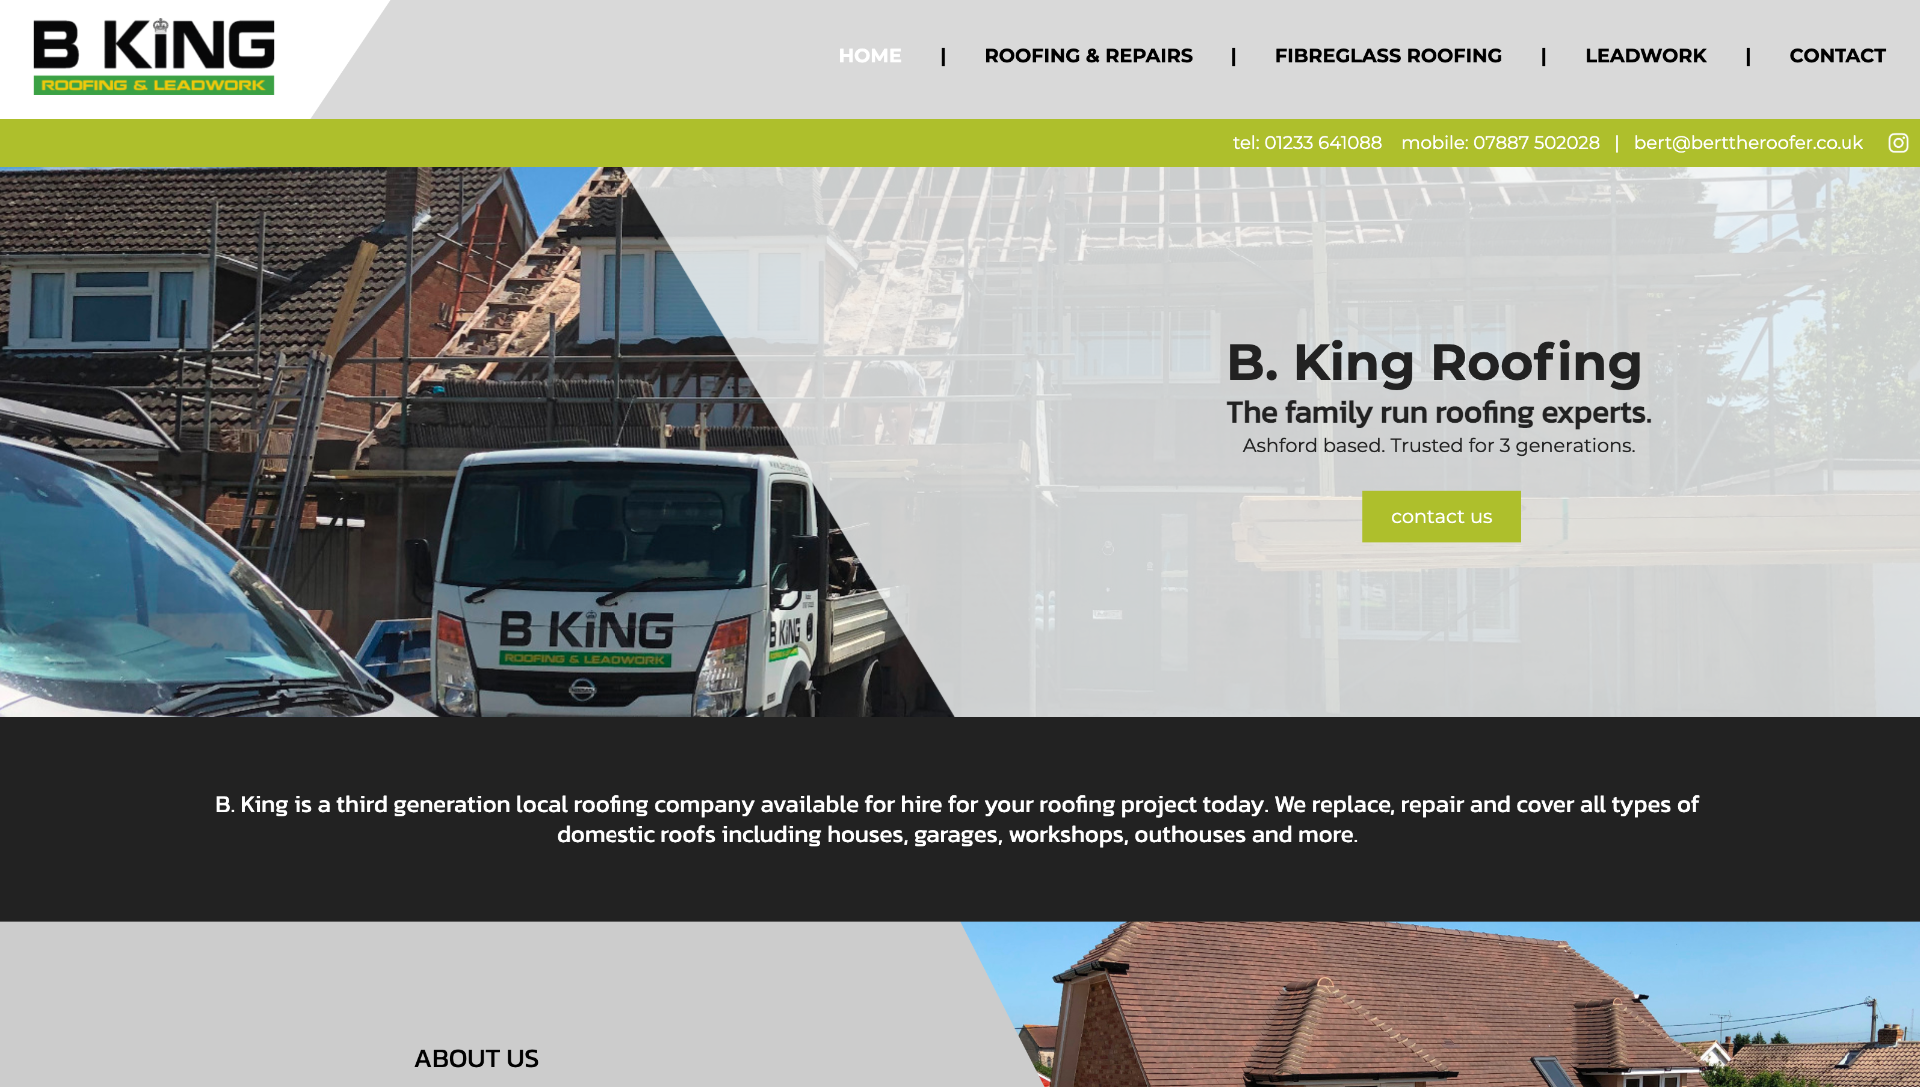 Example of a website built for a Kent based builder